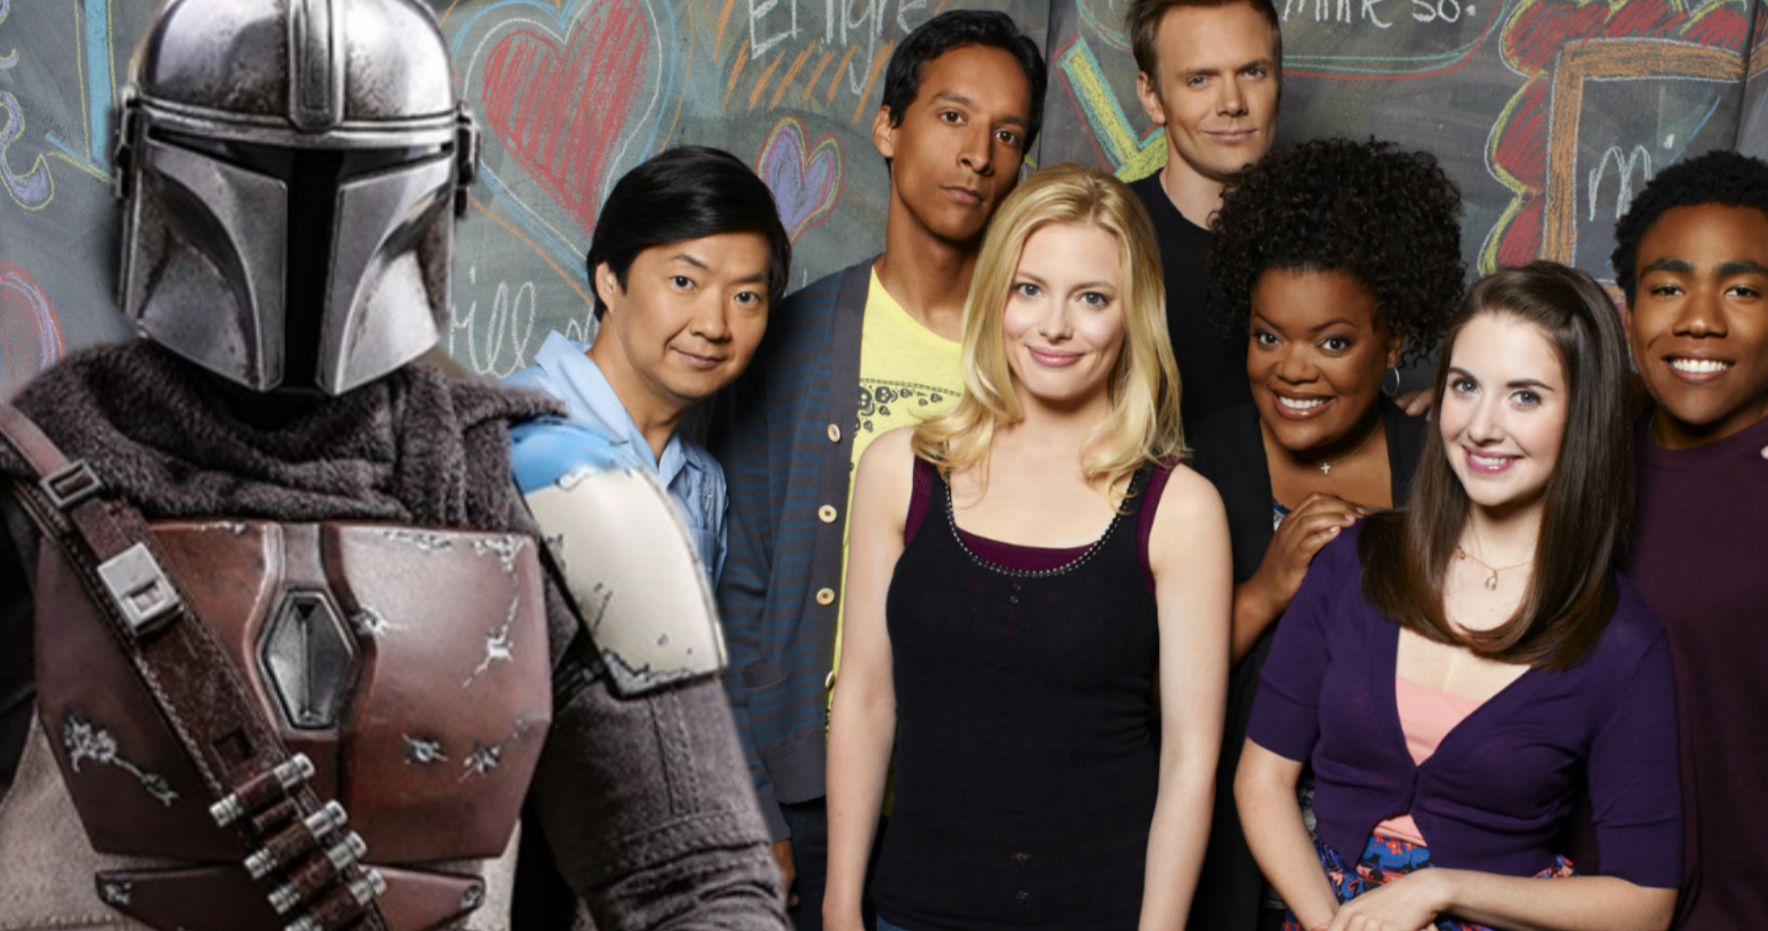 Community Cast Reunion Is Happening This Monday and They're Bringing The Mandalorian